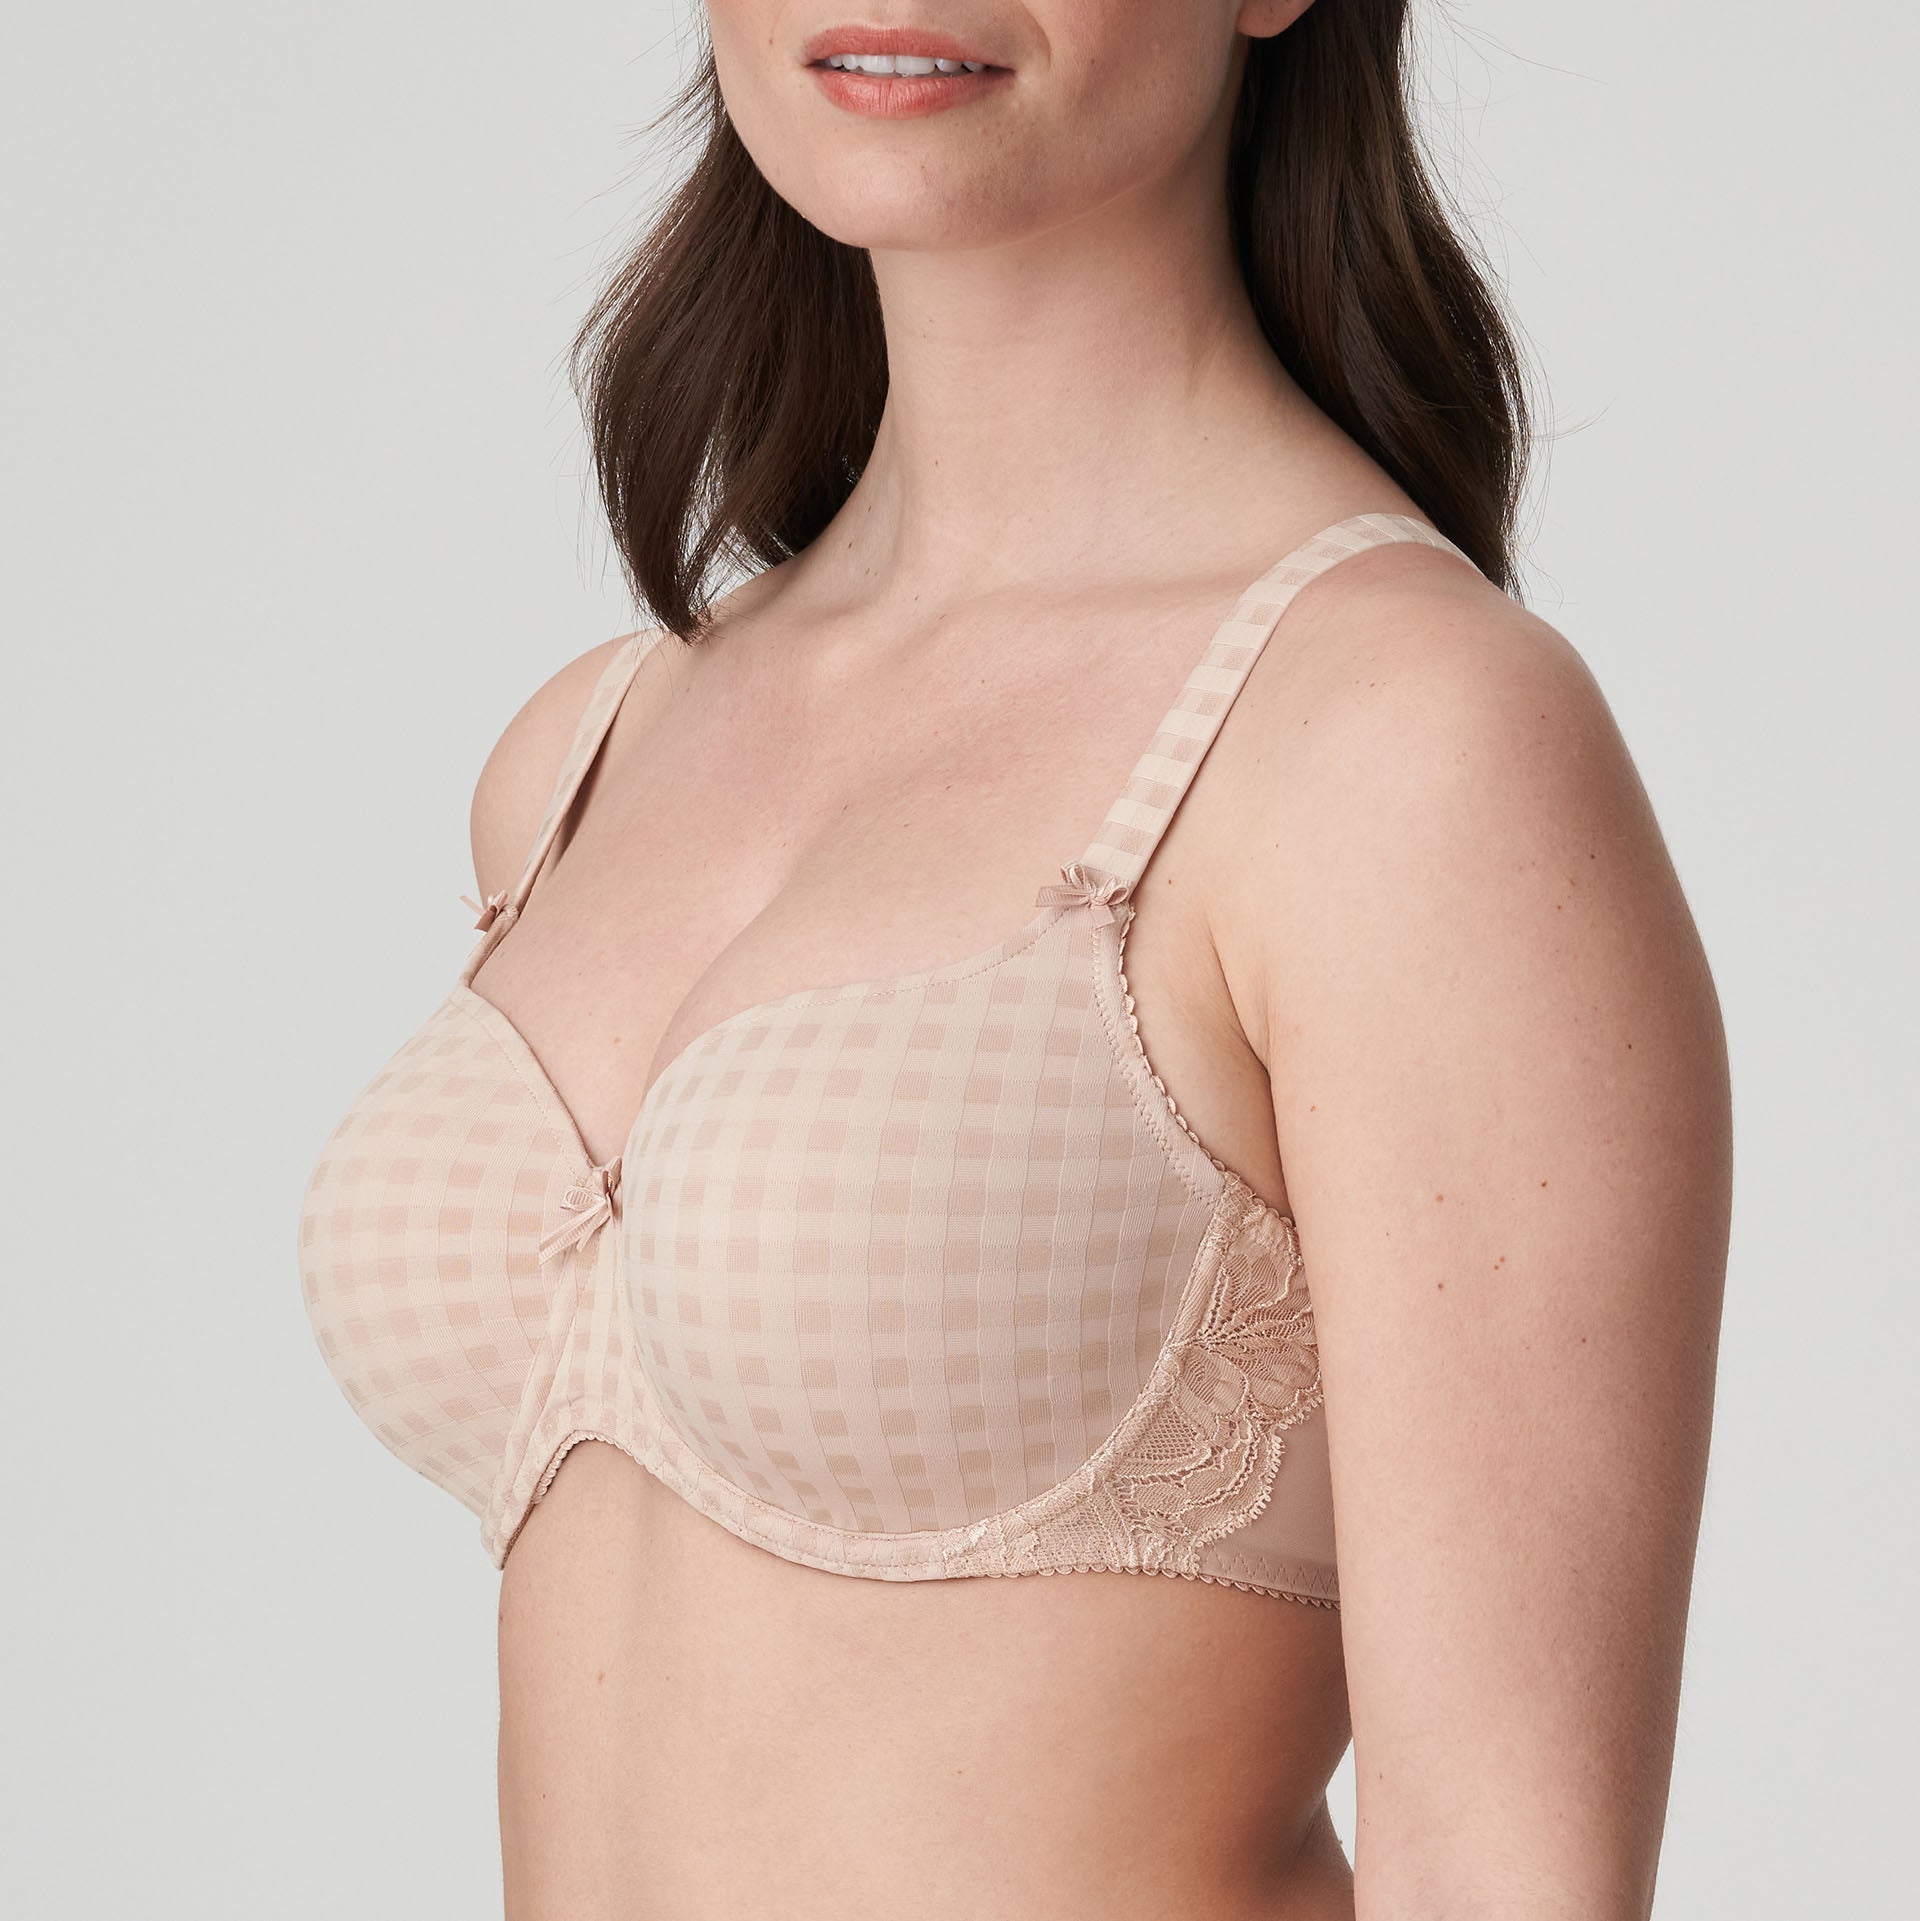 Side view of a woman wearing the DD+ Madison Moulded Cup Bra with light padding in Caffe Latte by Primadonna.